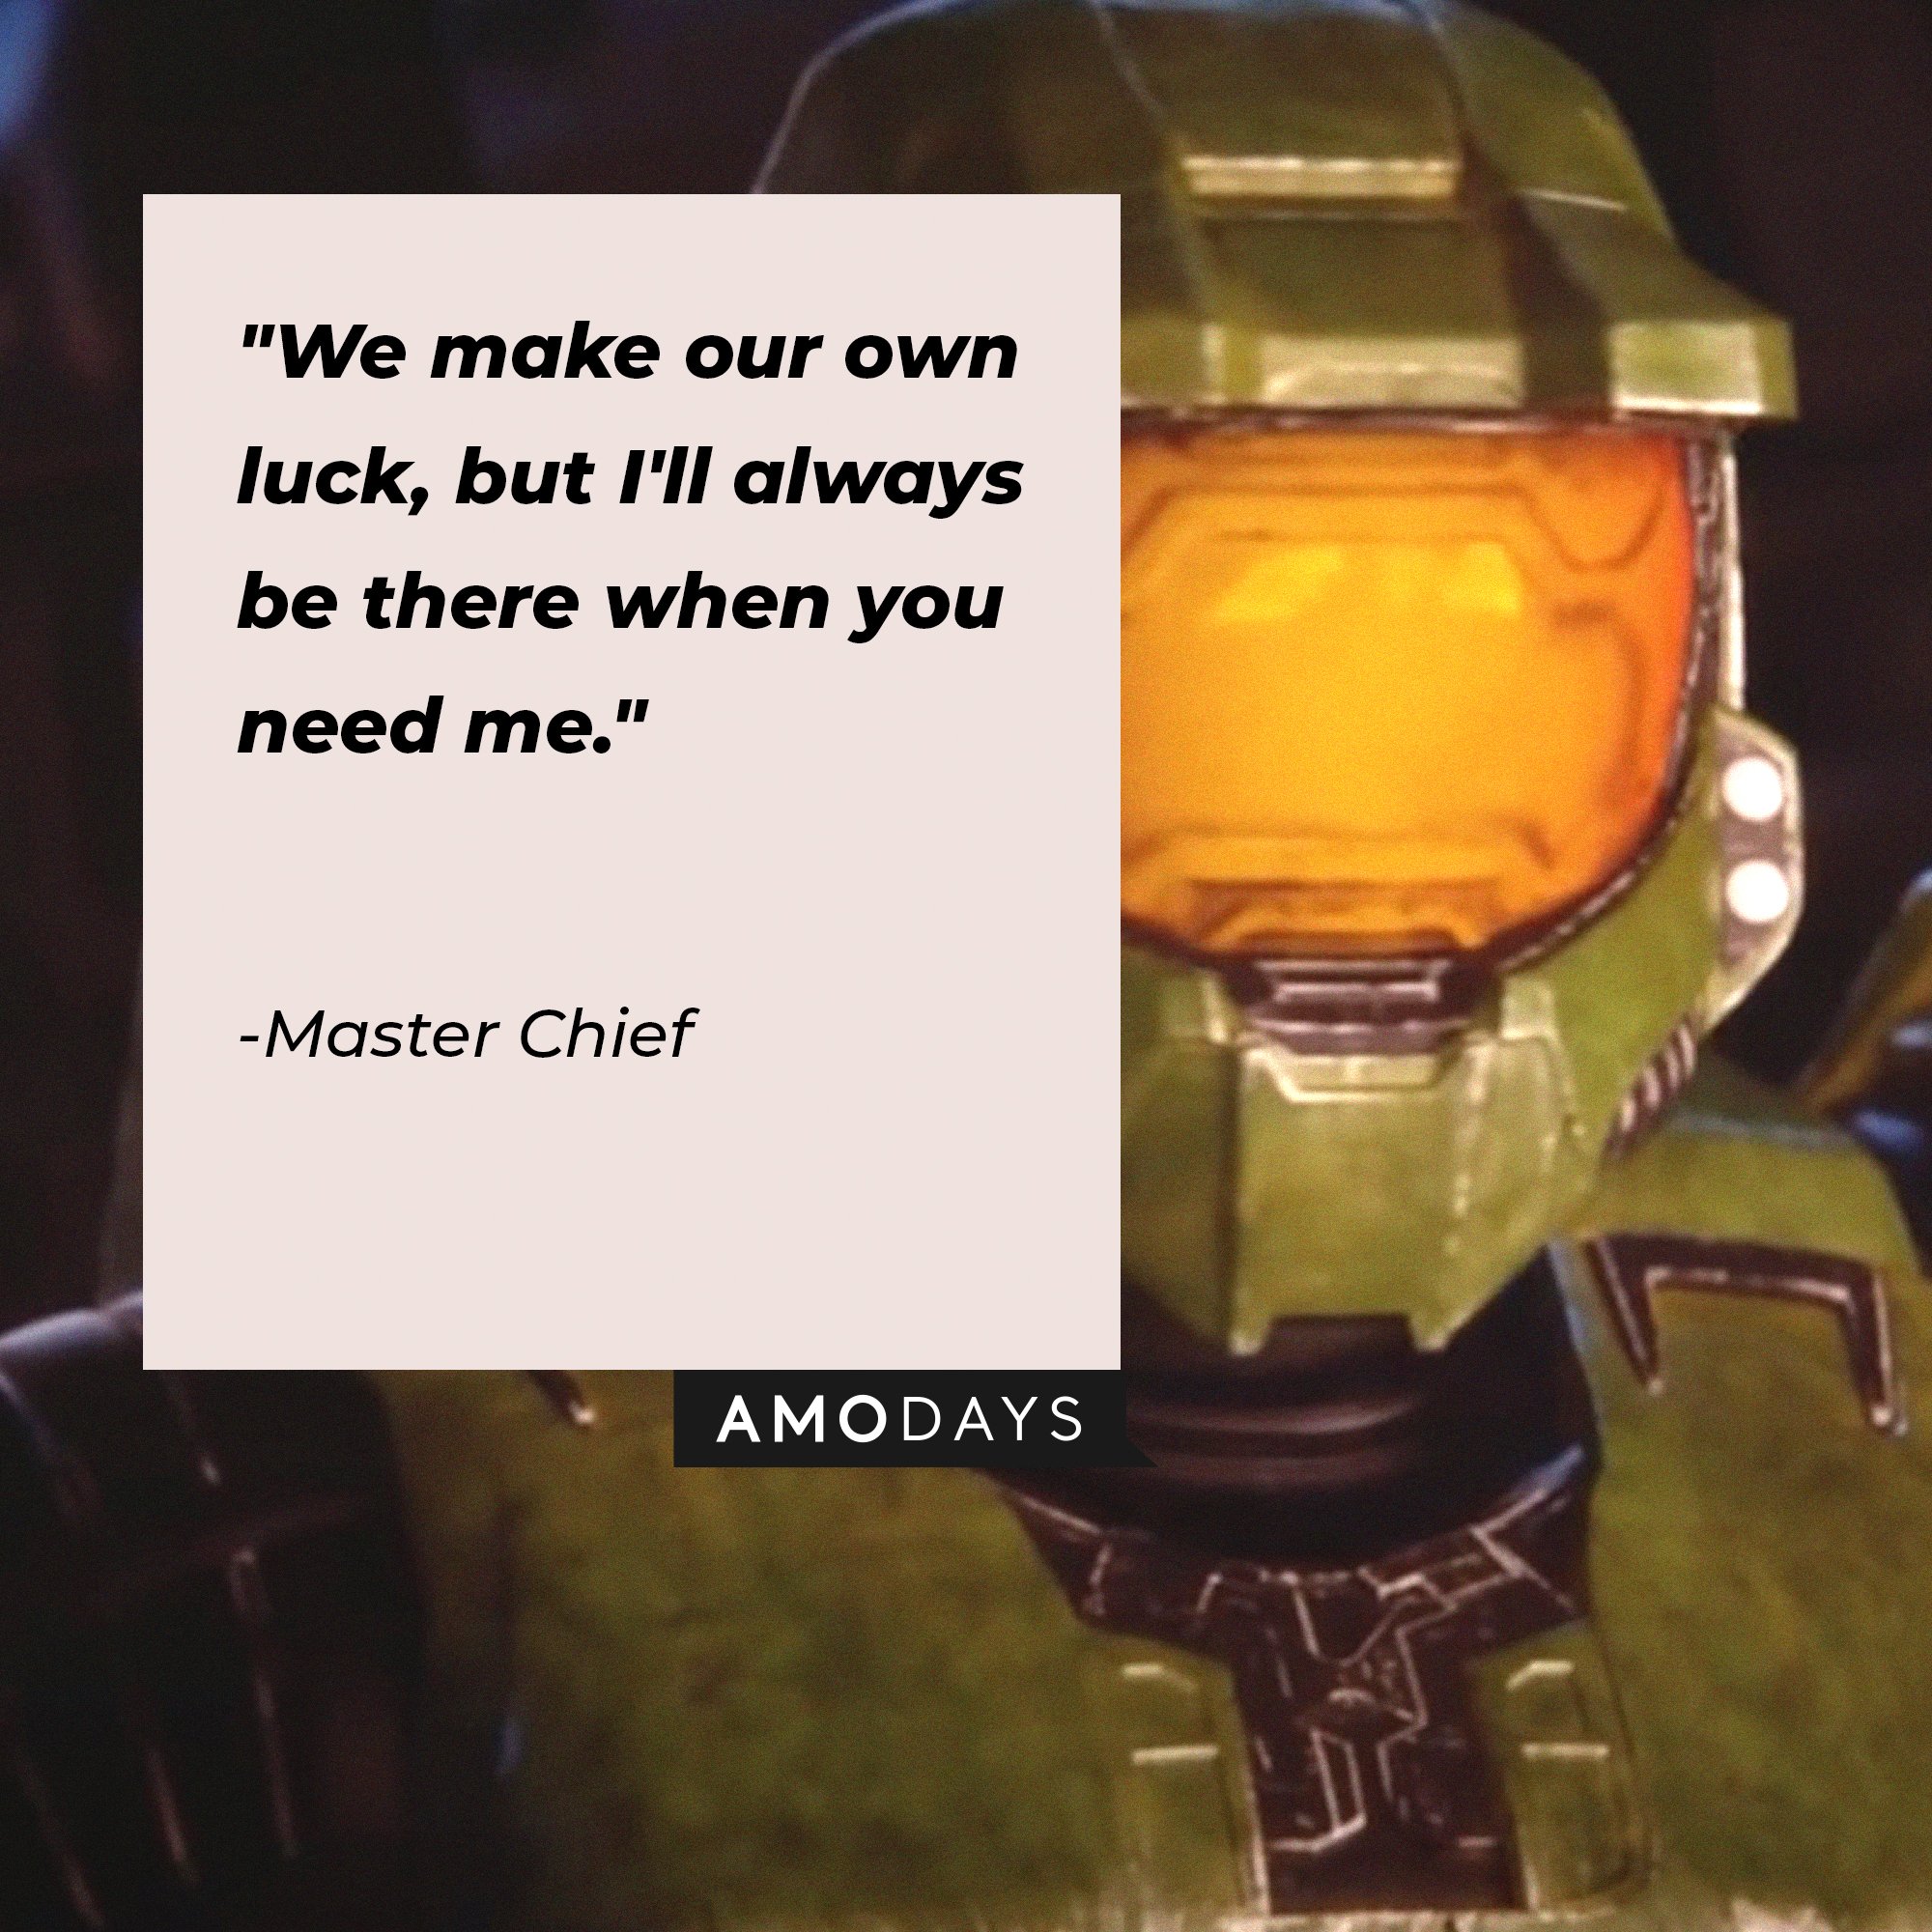 Master Chief's quote: "We make our own luck, but I'll always be there when you need me." | Image: AmoDays